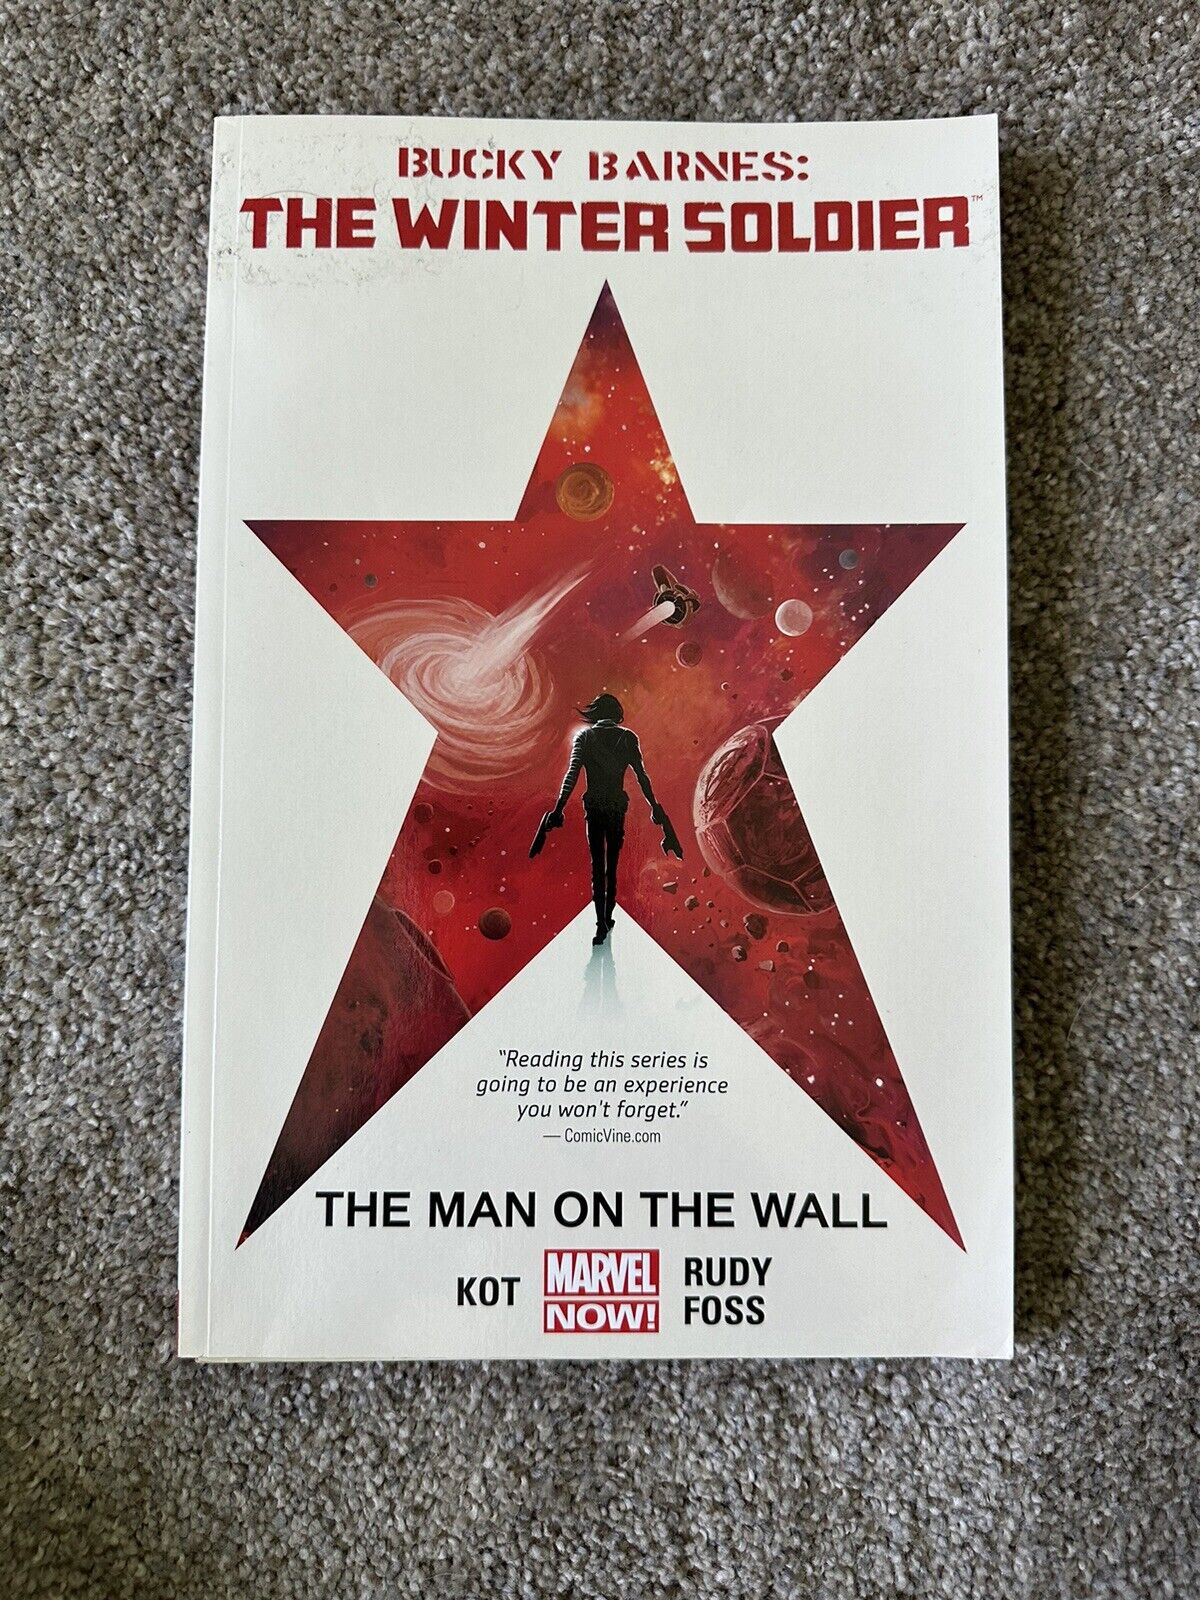 Bucky Barnes: The Winter Soldier: The Man on The Wall  (Vol. 1)  & (Vol.2)